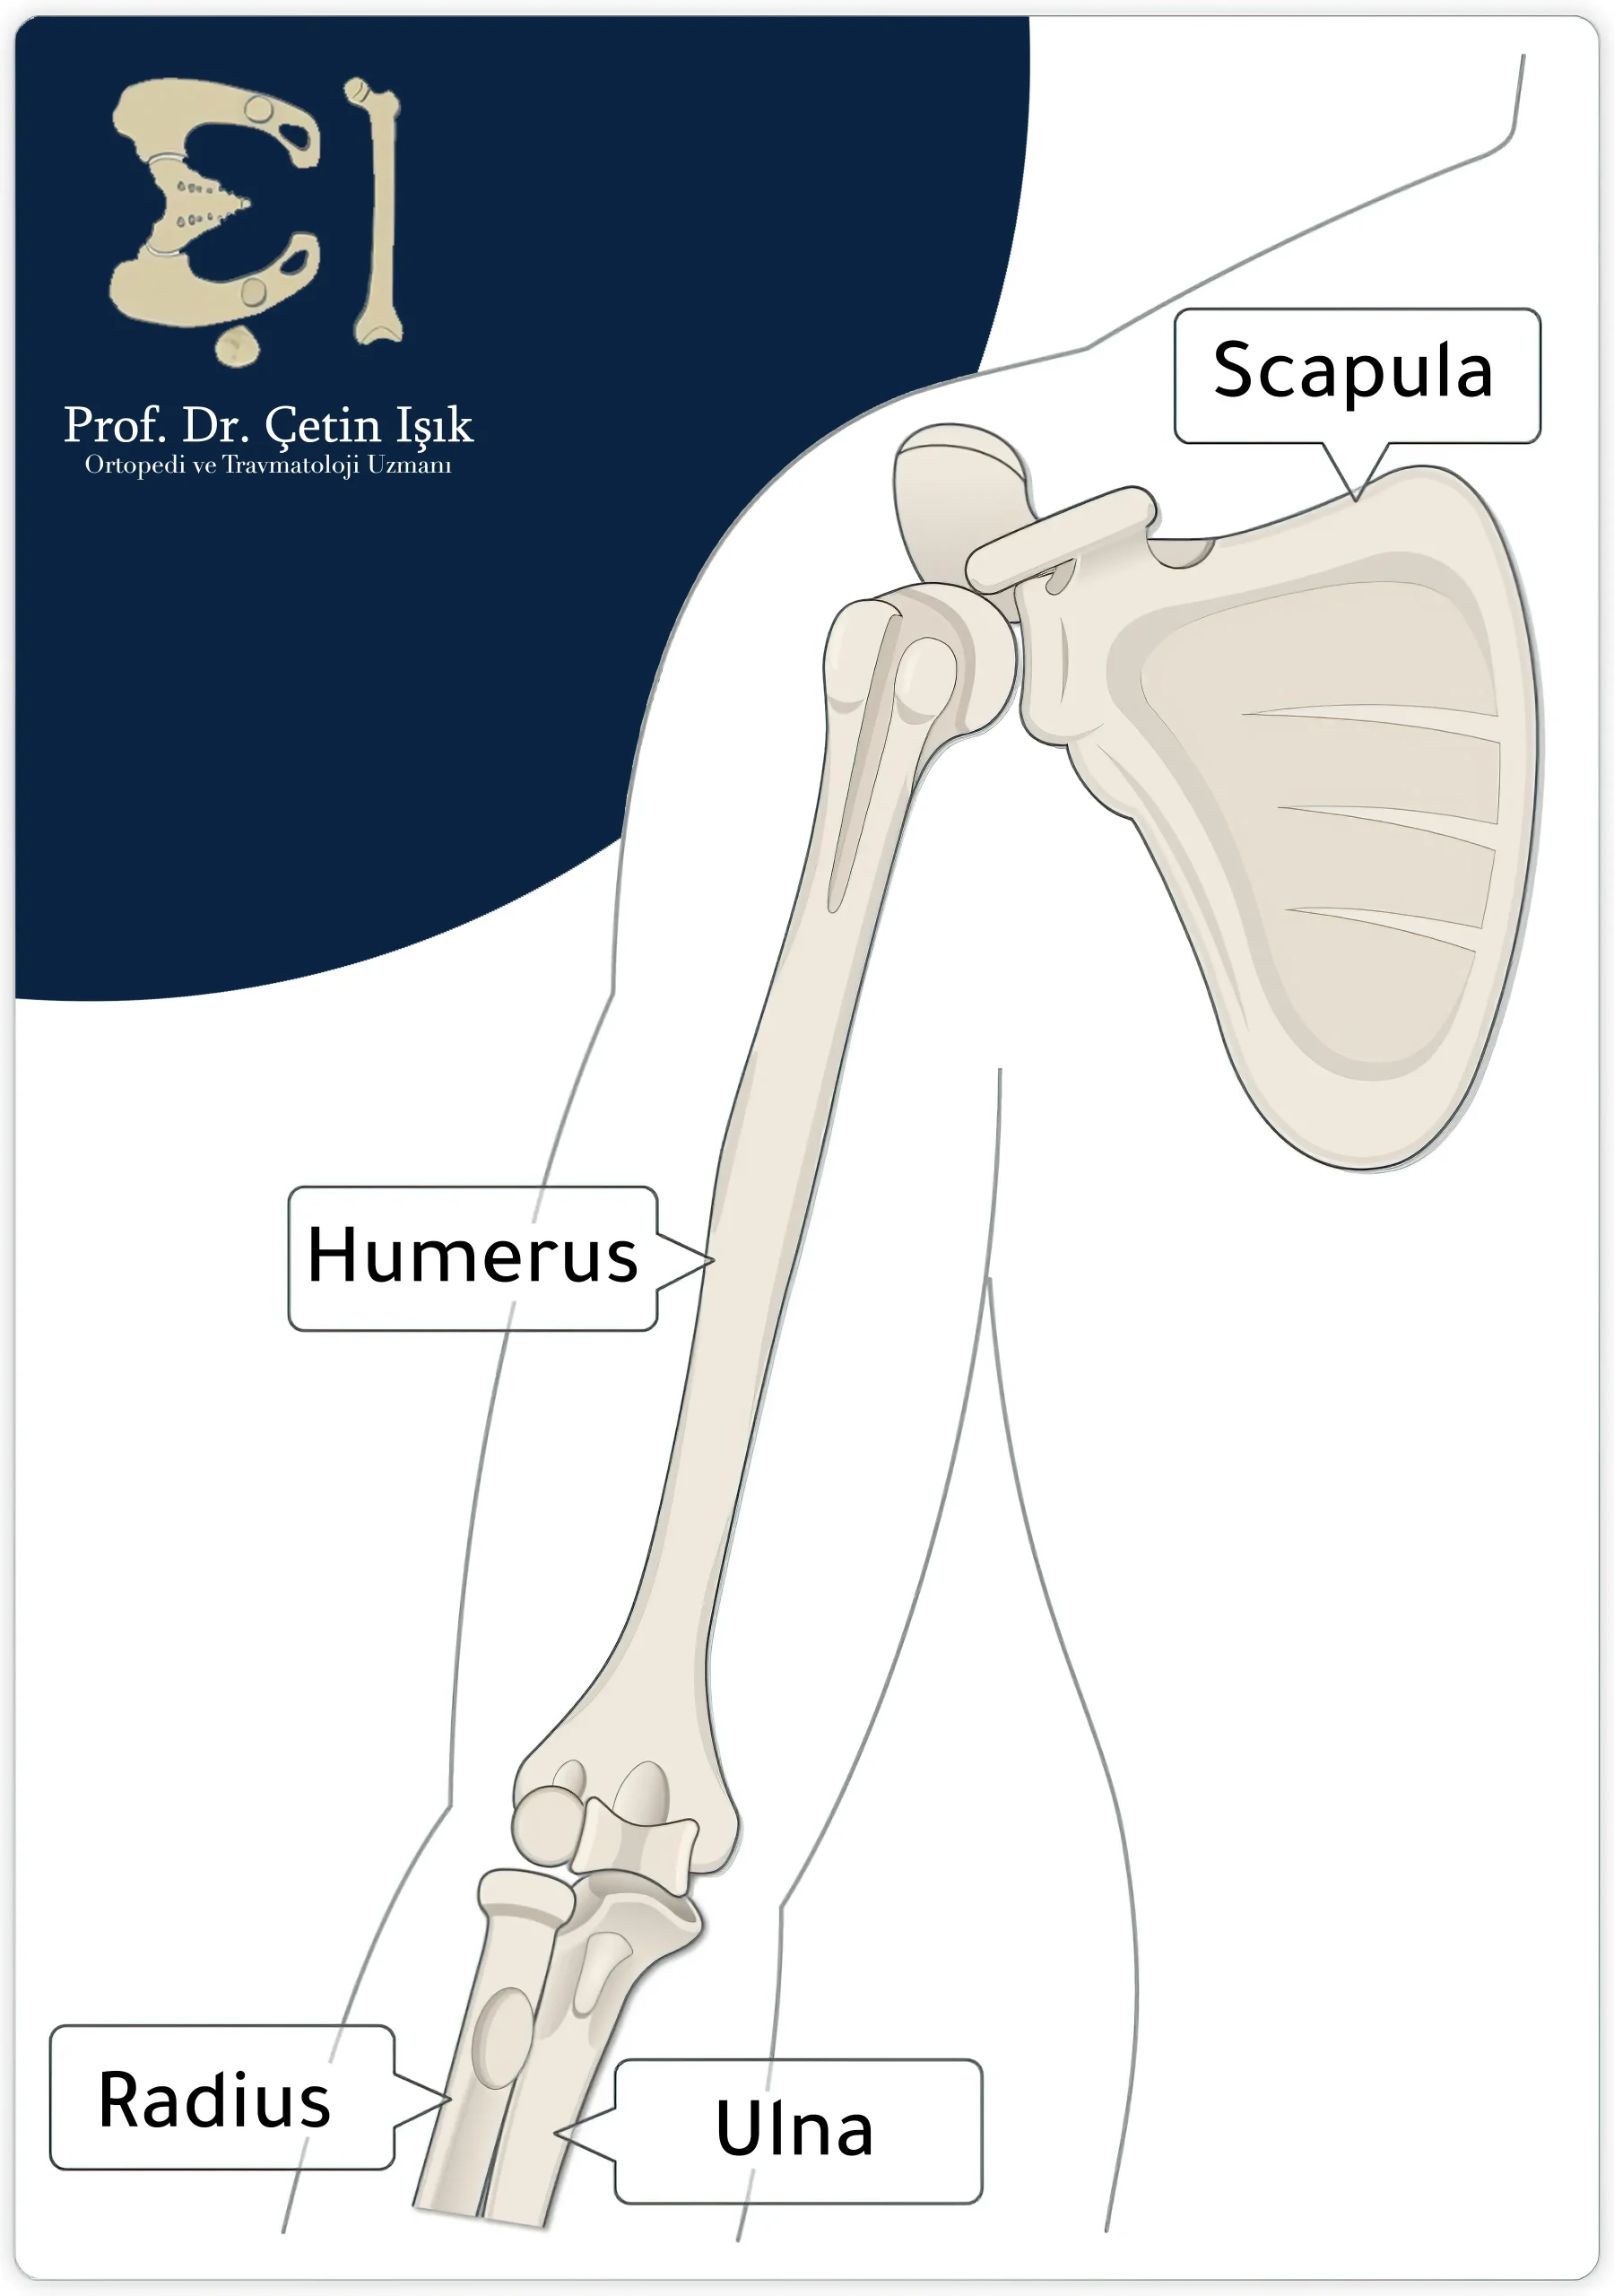 A picture shows the humerus's location in the body and places it between the scapula at the top and the radius and ulna at the bottom.